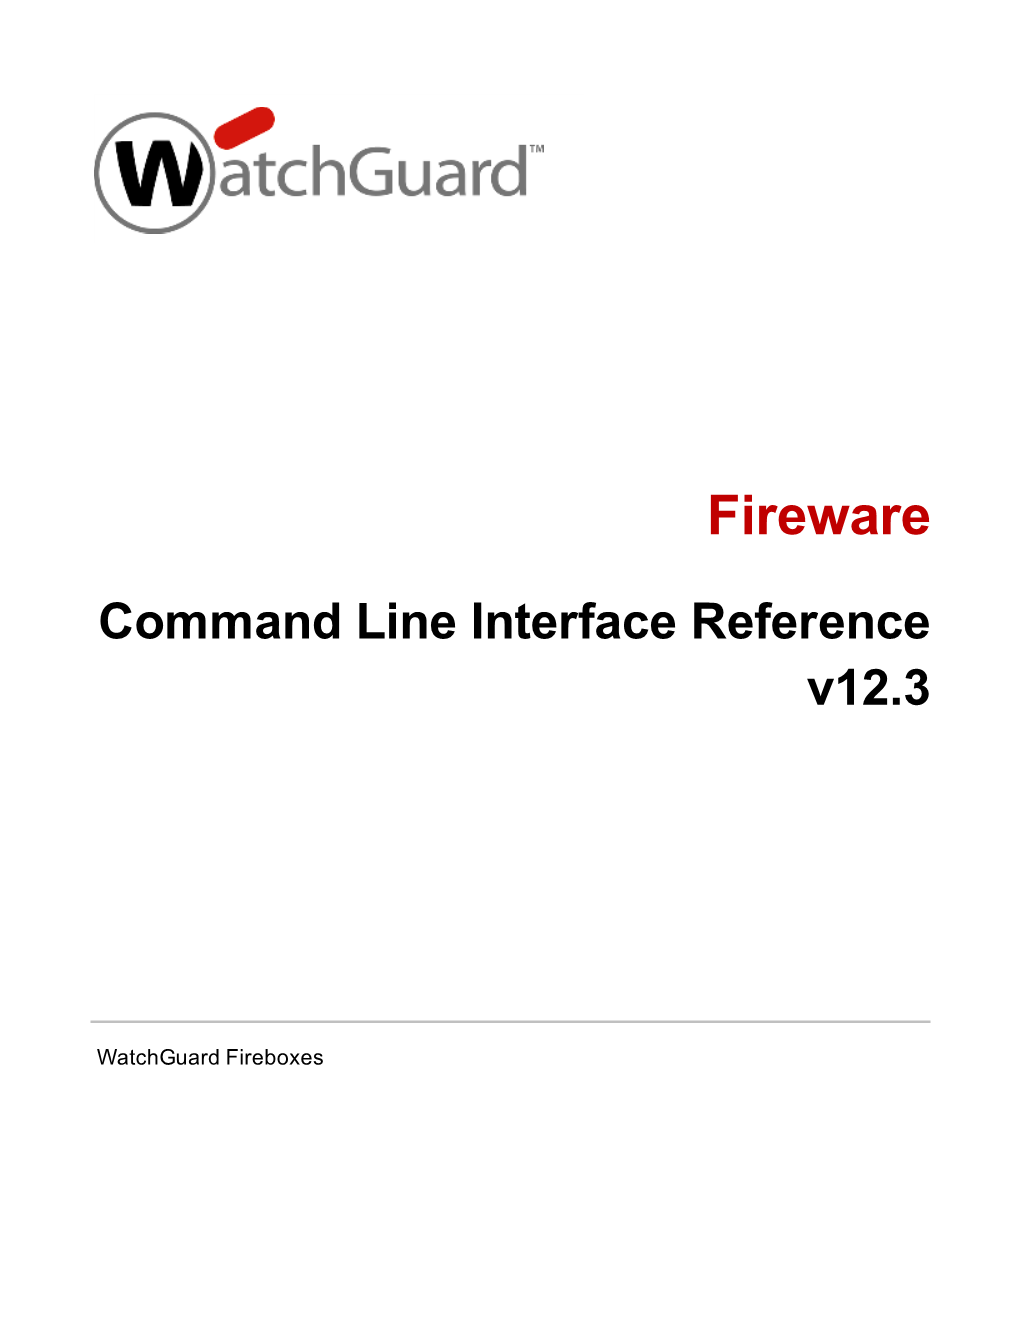 Fireware Command Line Interface Reference V12.3